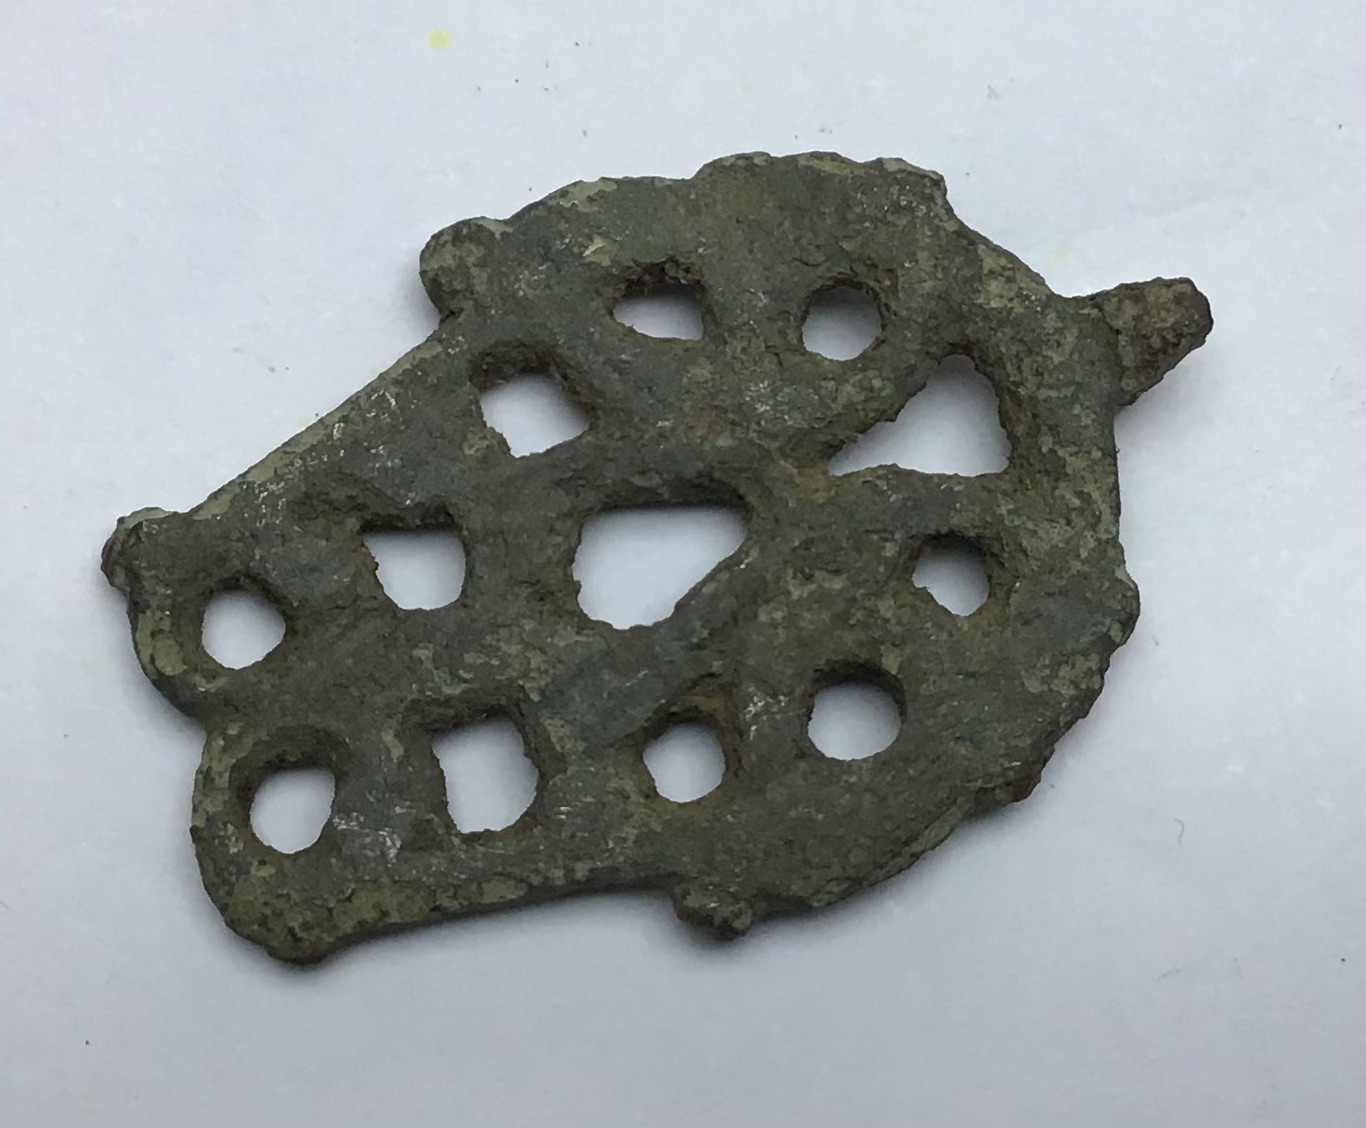 Incomplete medieval copper alloy openwork harness pendant in rather worn condition. The upper part